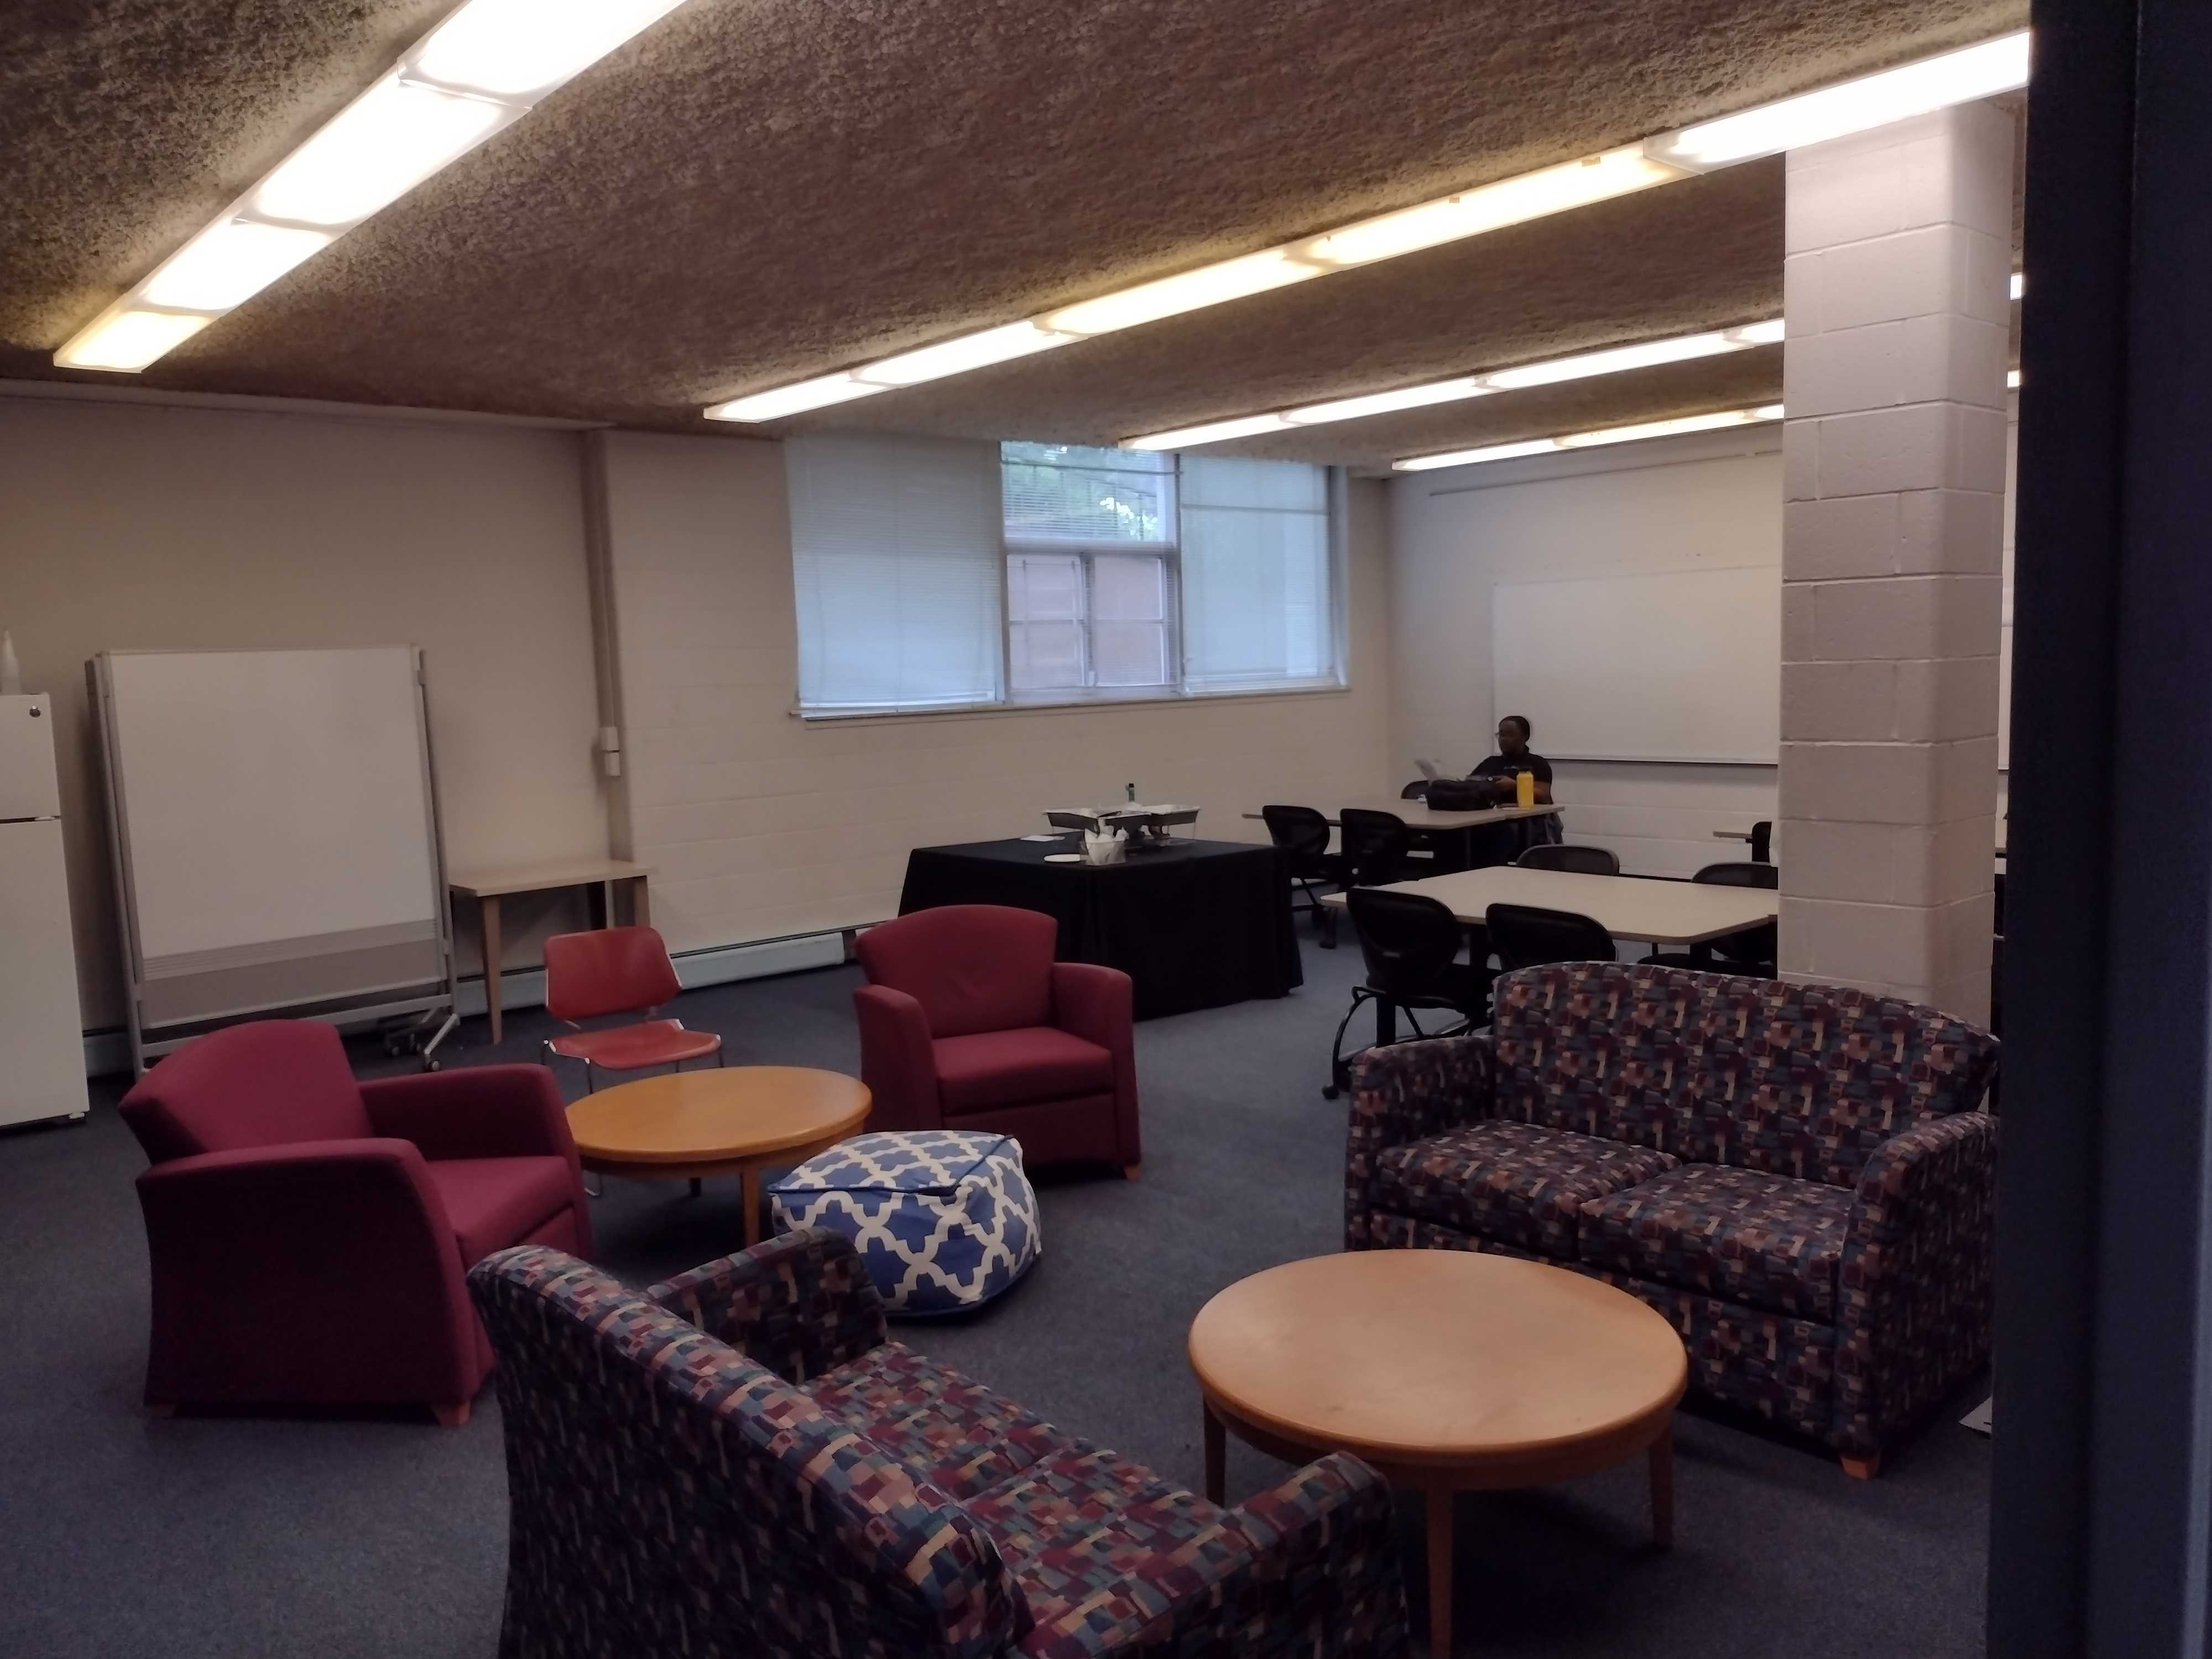 A nearly empty commuter lounge. Photo by Jacob Pegan.